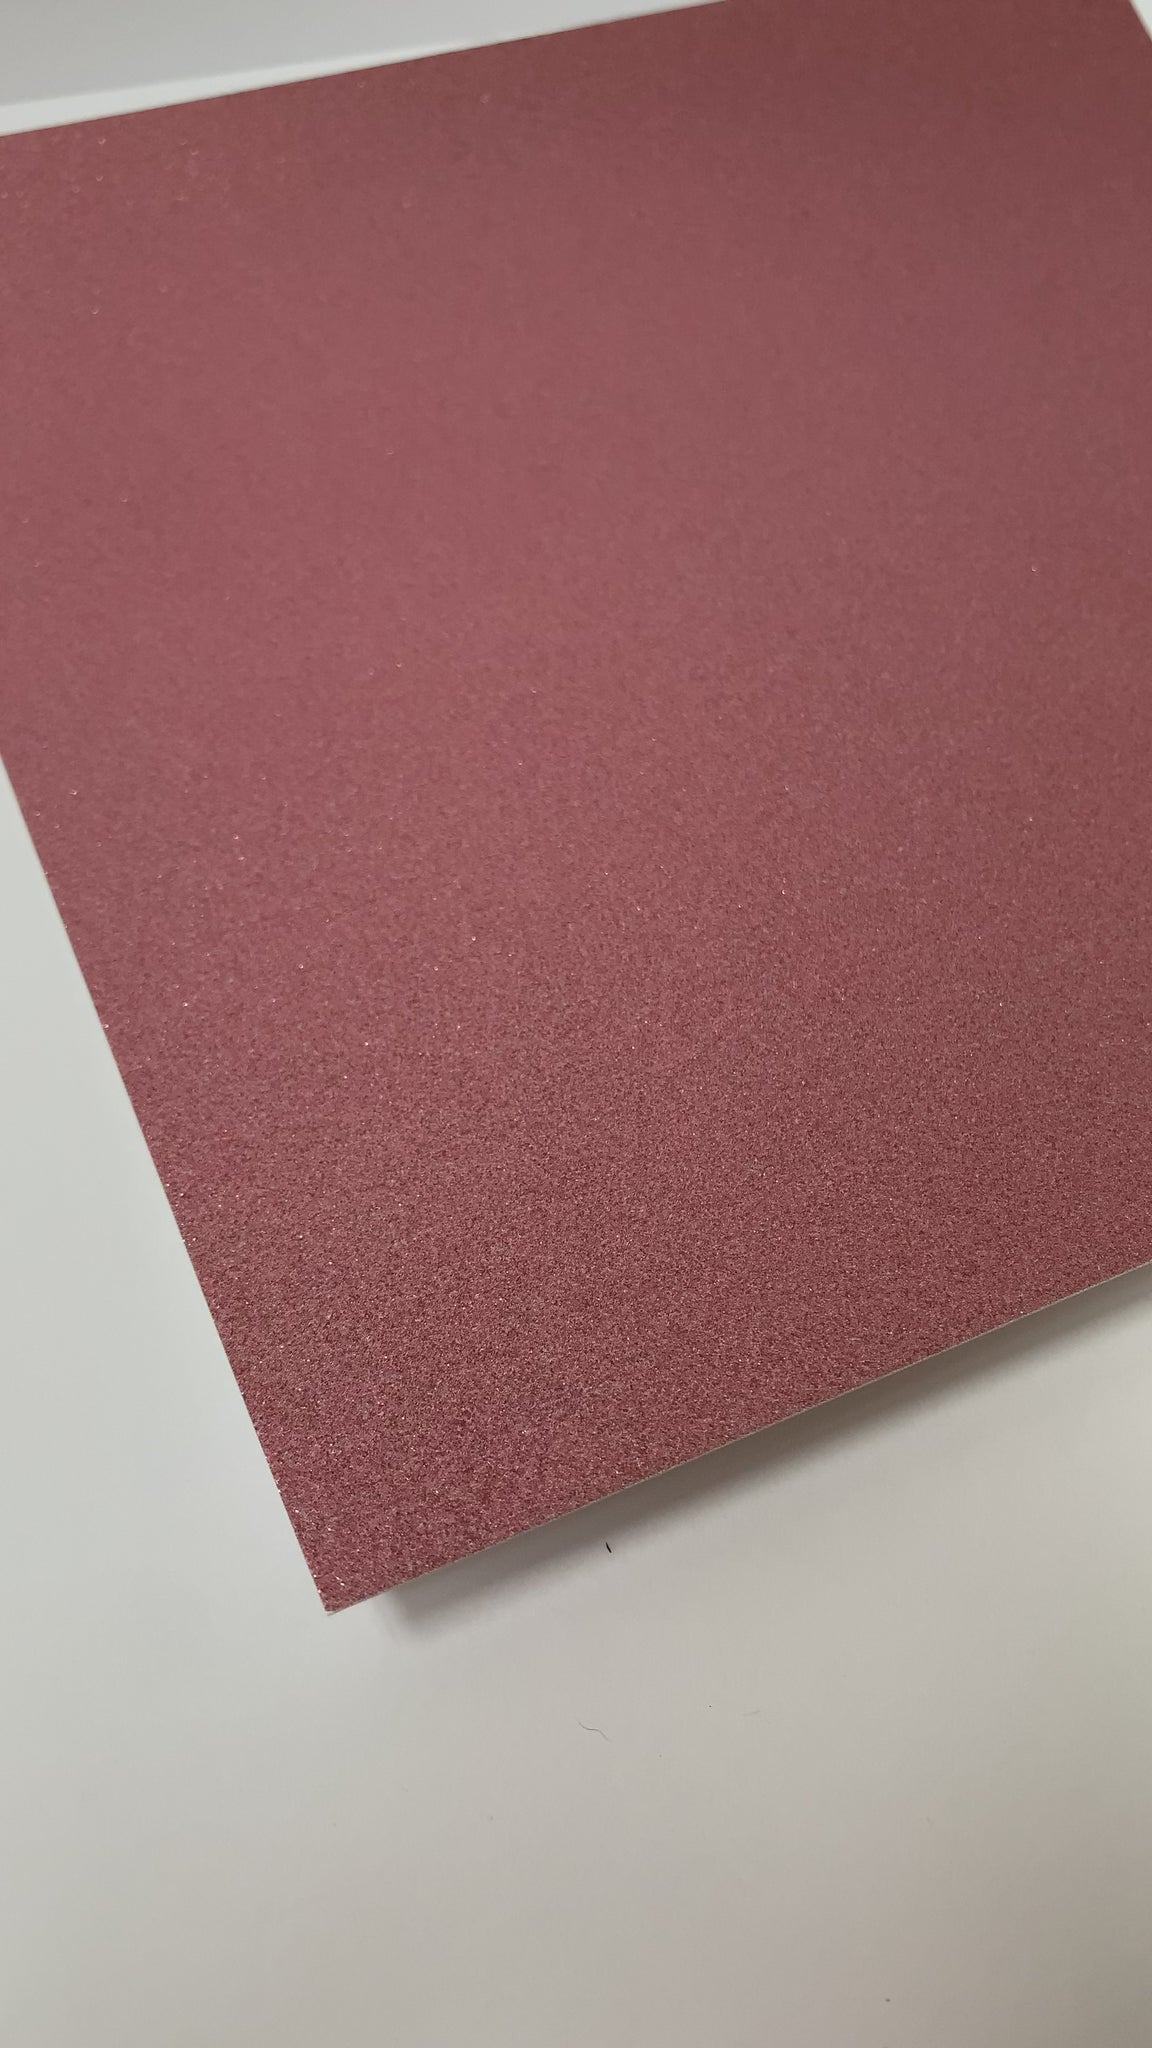 12''x12'' No-shed Glitter Cardstock - 10PK/Bubble Gum Pink